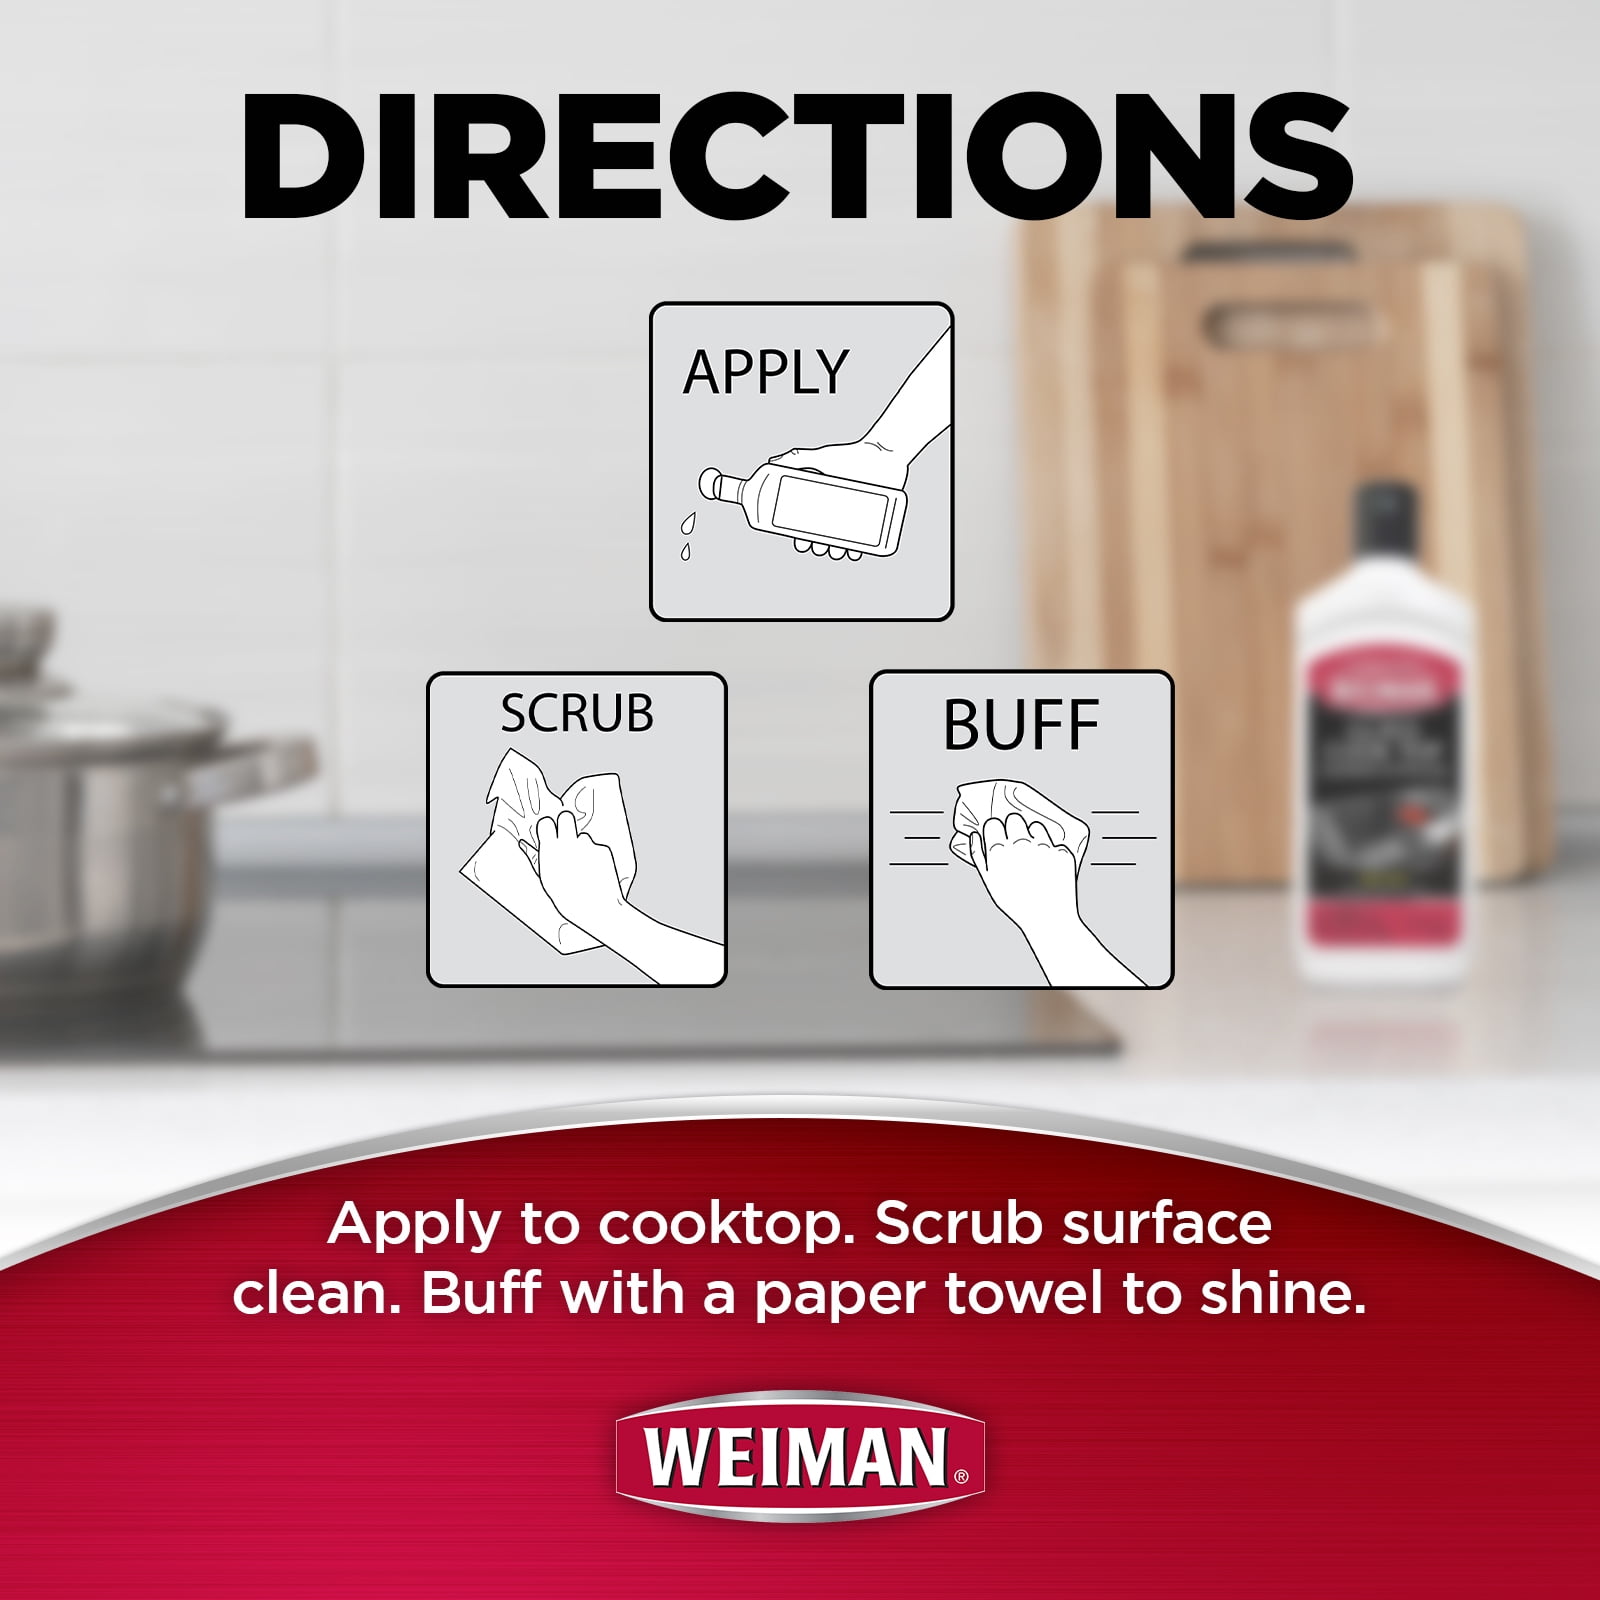 Save on Weiman Complete Cook Top Cleaning Kit - 4 Piece Order Online  Delivery